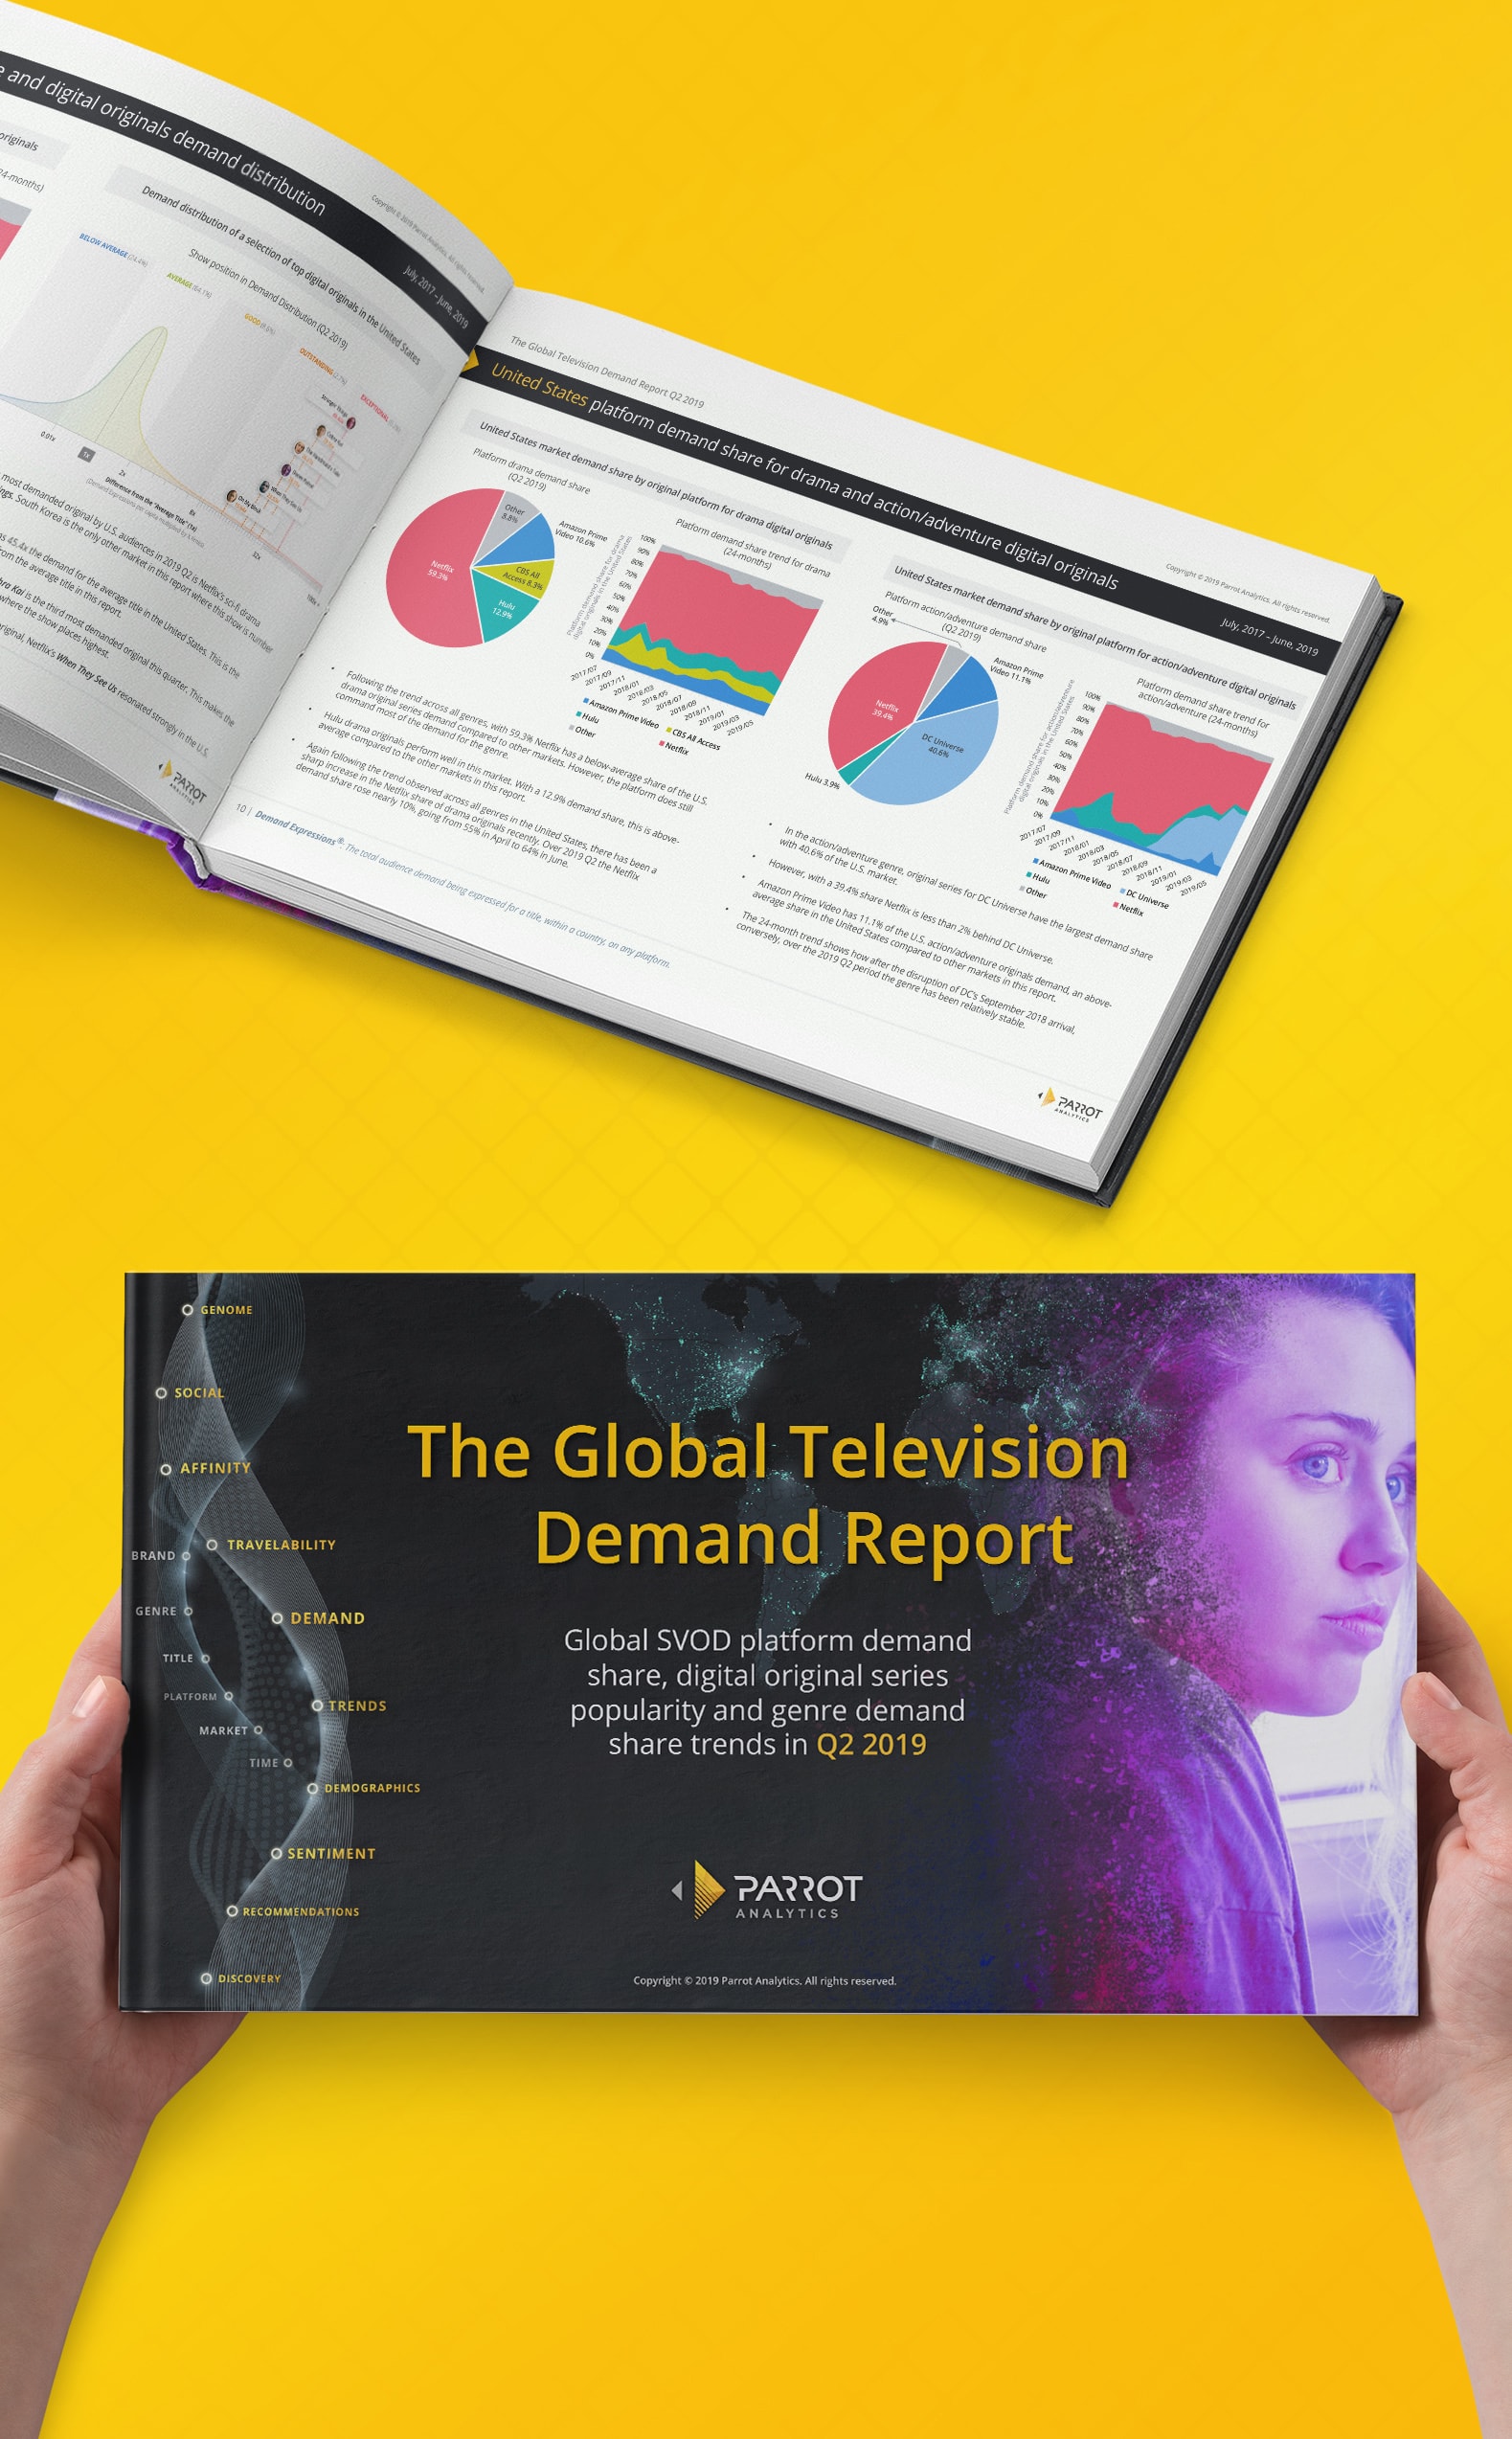 The Global Television Demand Report 2019